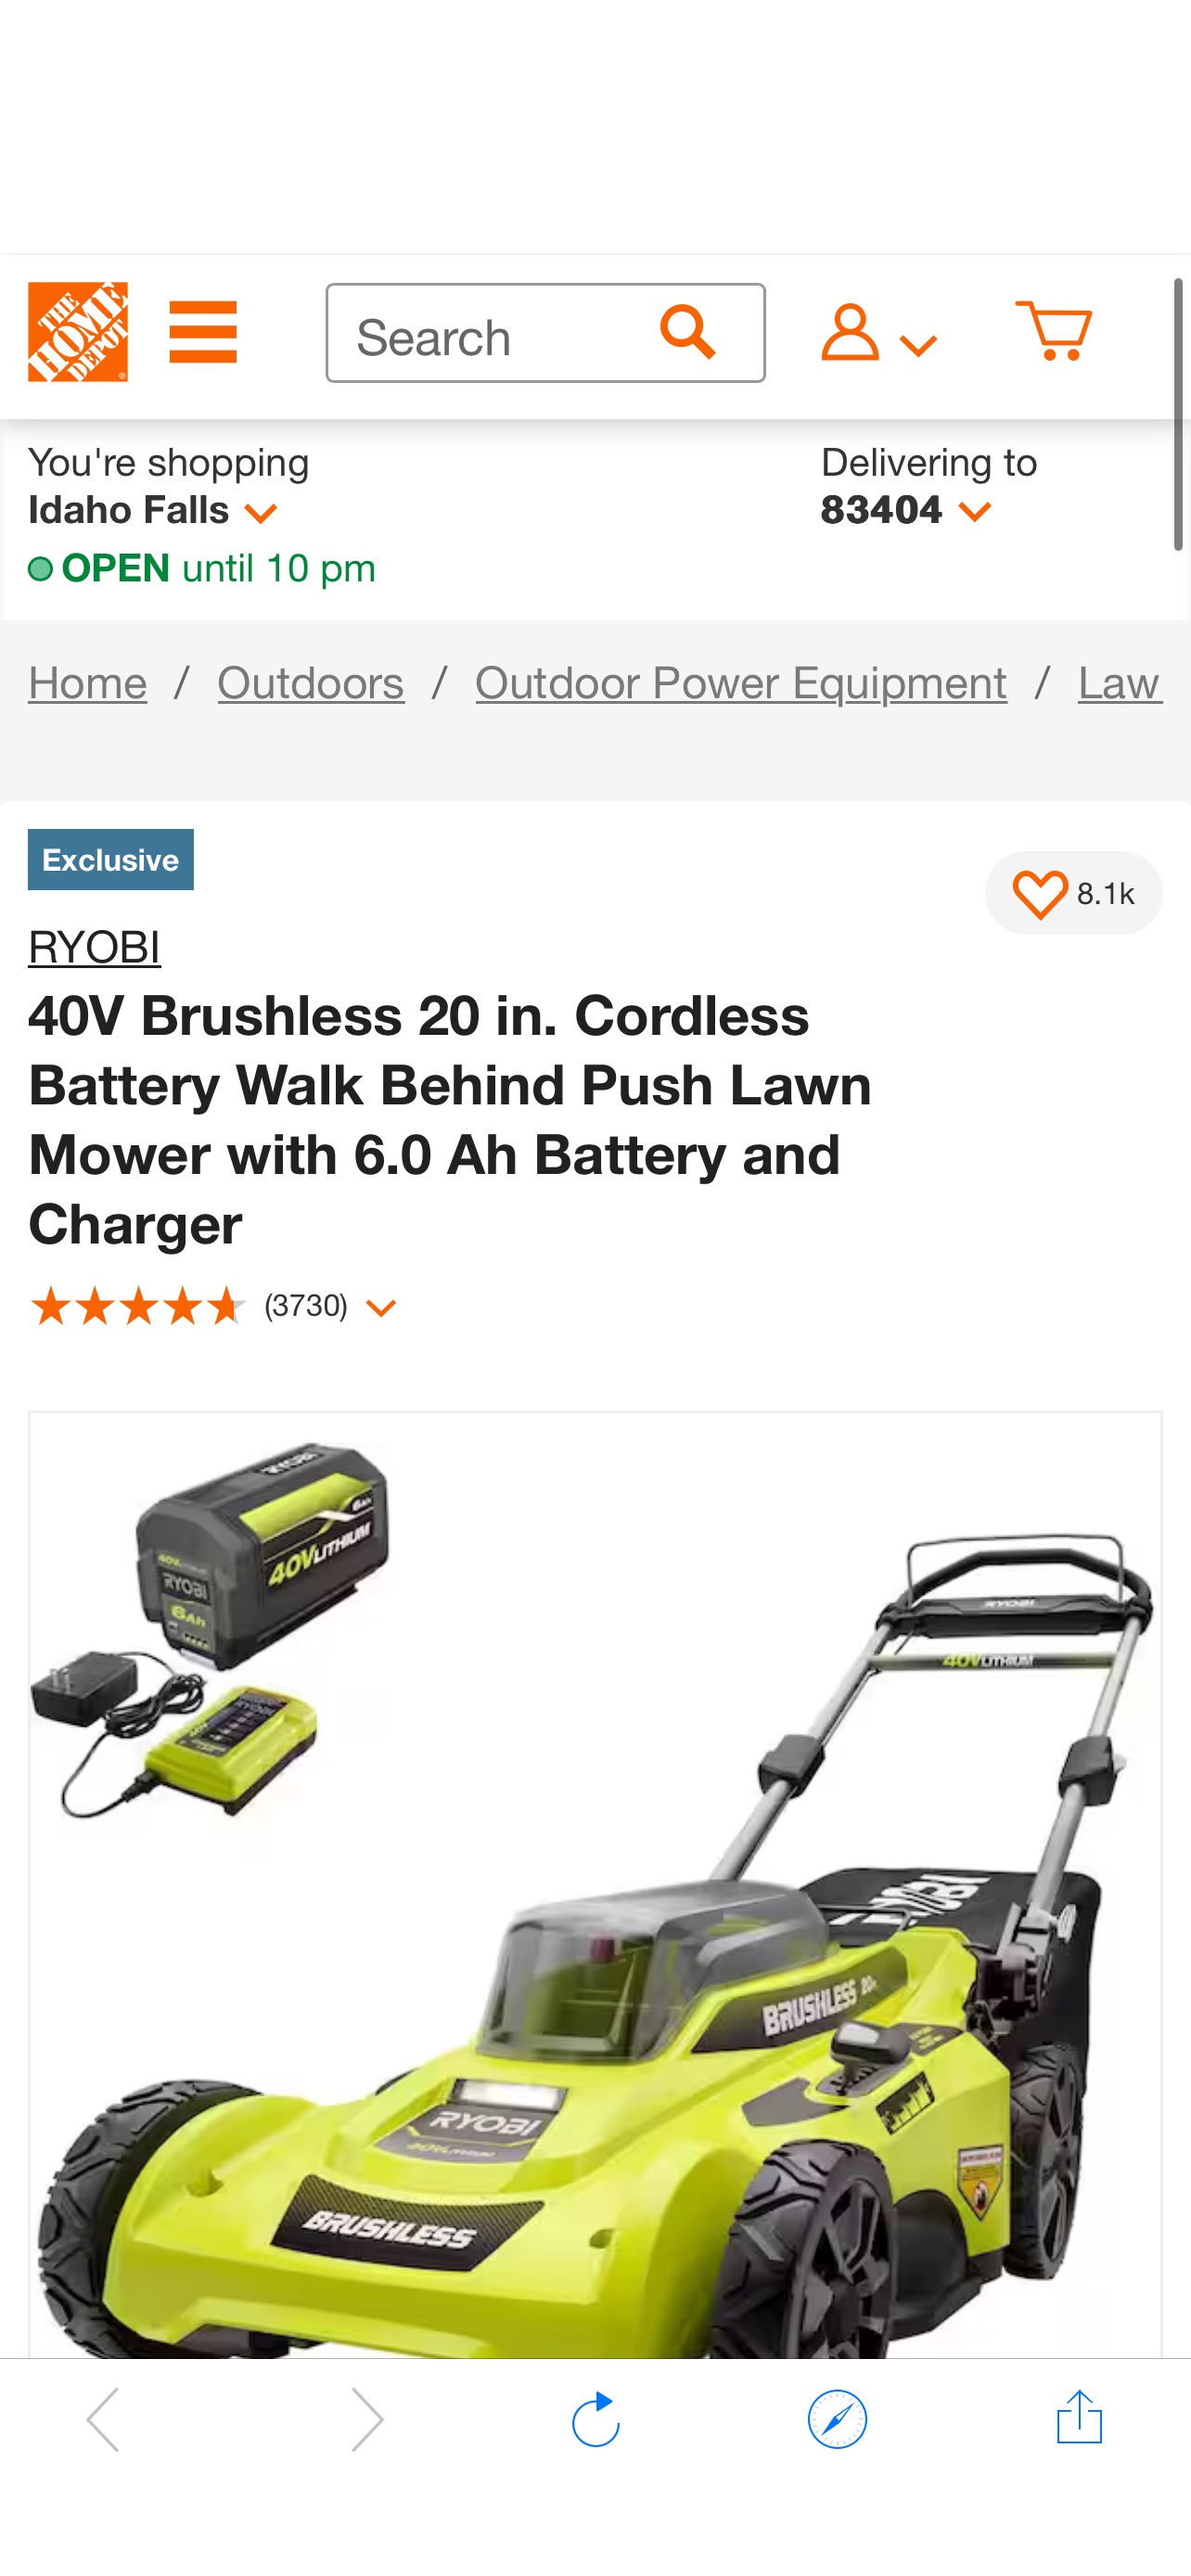 RYOBI 40V Brushless 20 in. Cordless Battery Walk Behind Push Lawn Mower with 6.0 Ah Battery and Charger RY401110-Y - The Home Depot